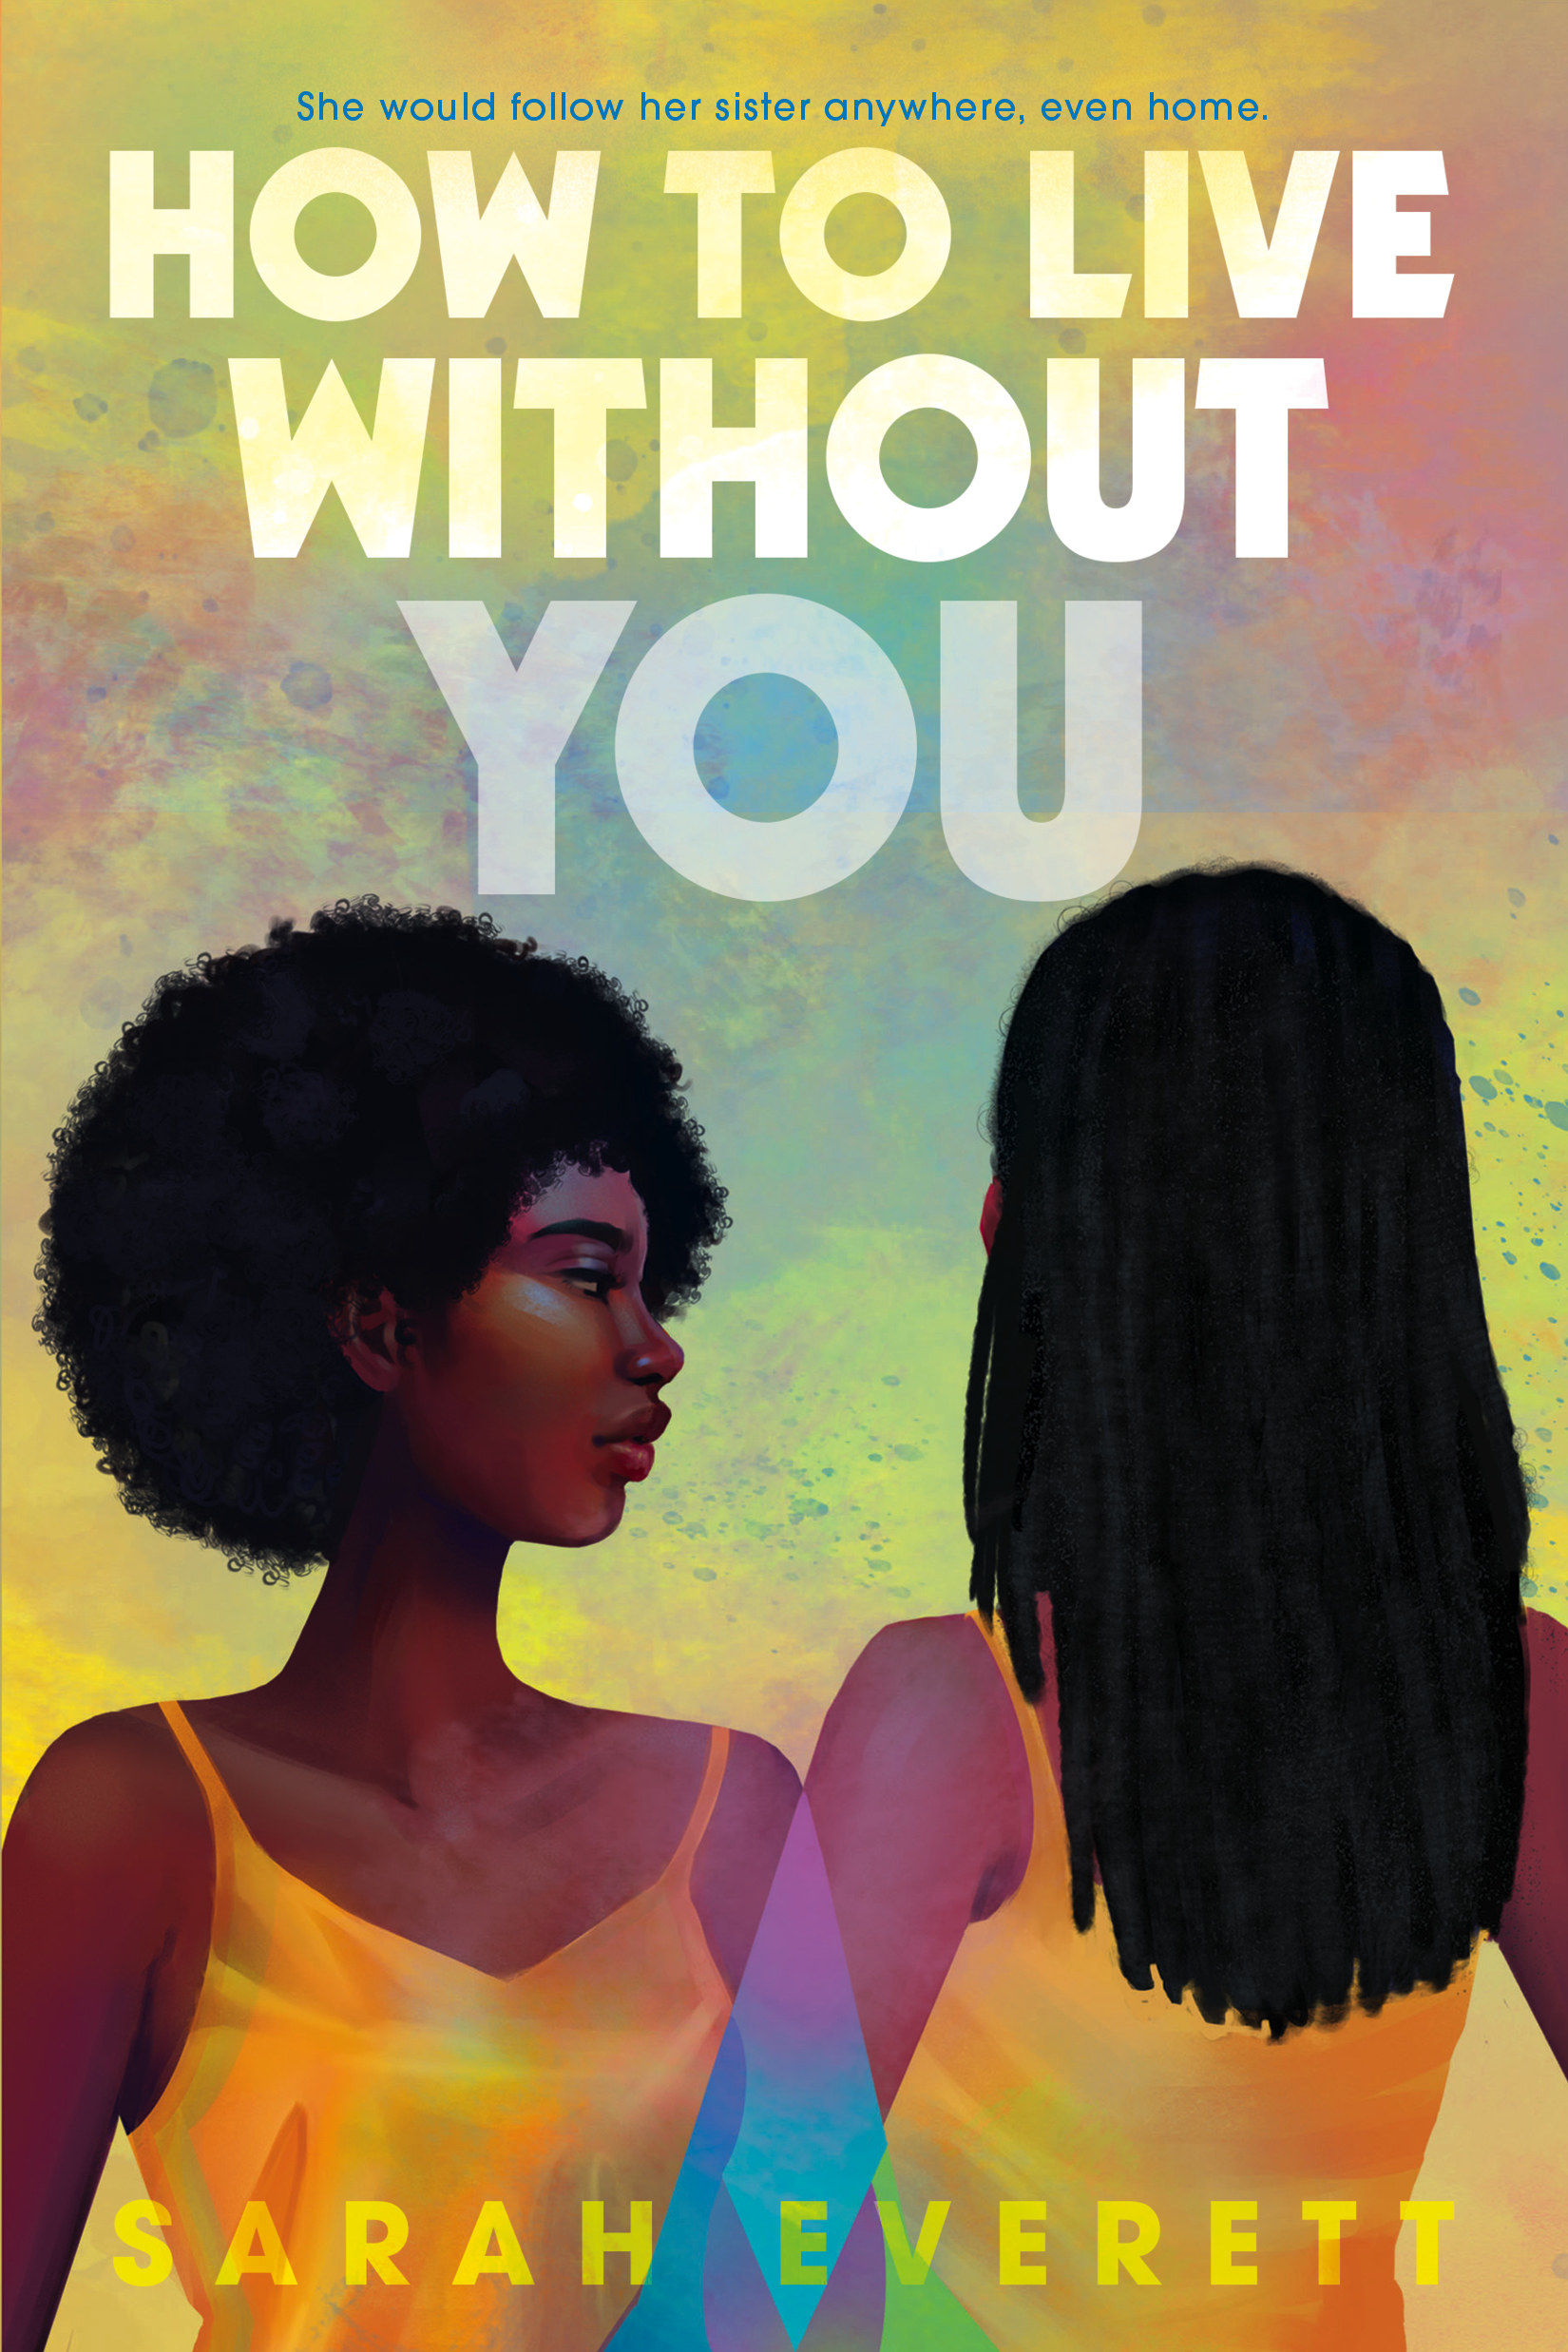 &quot;How to Live Without You&quot; cover illustration of two young women facing toward each other